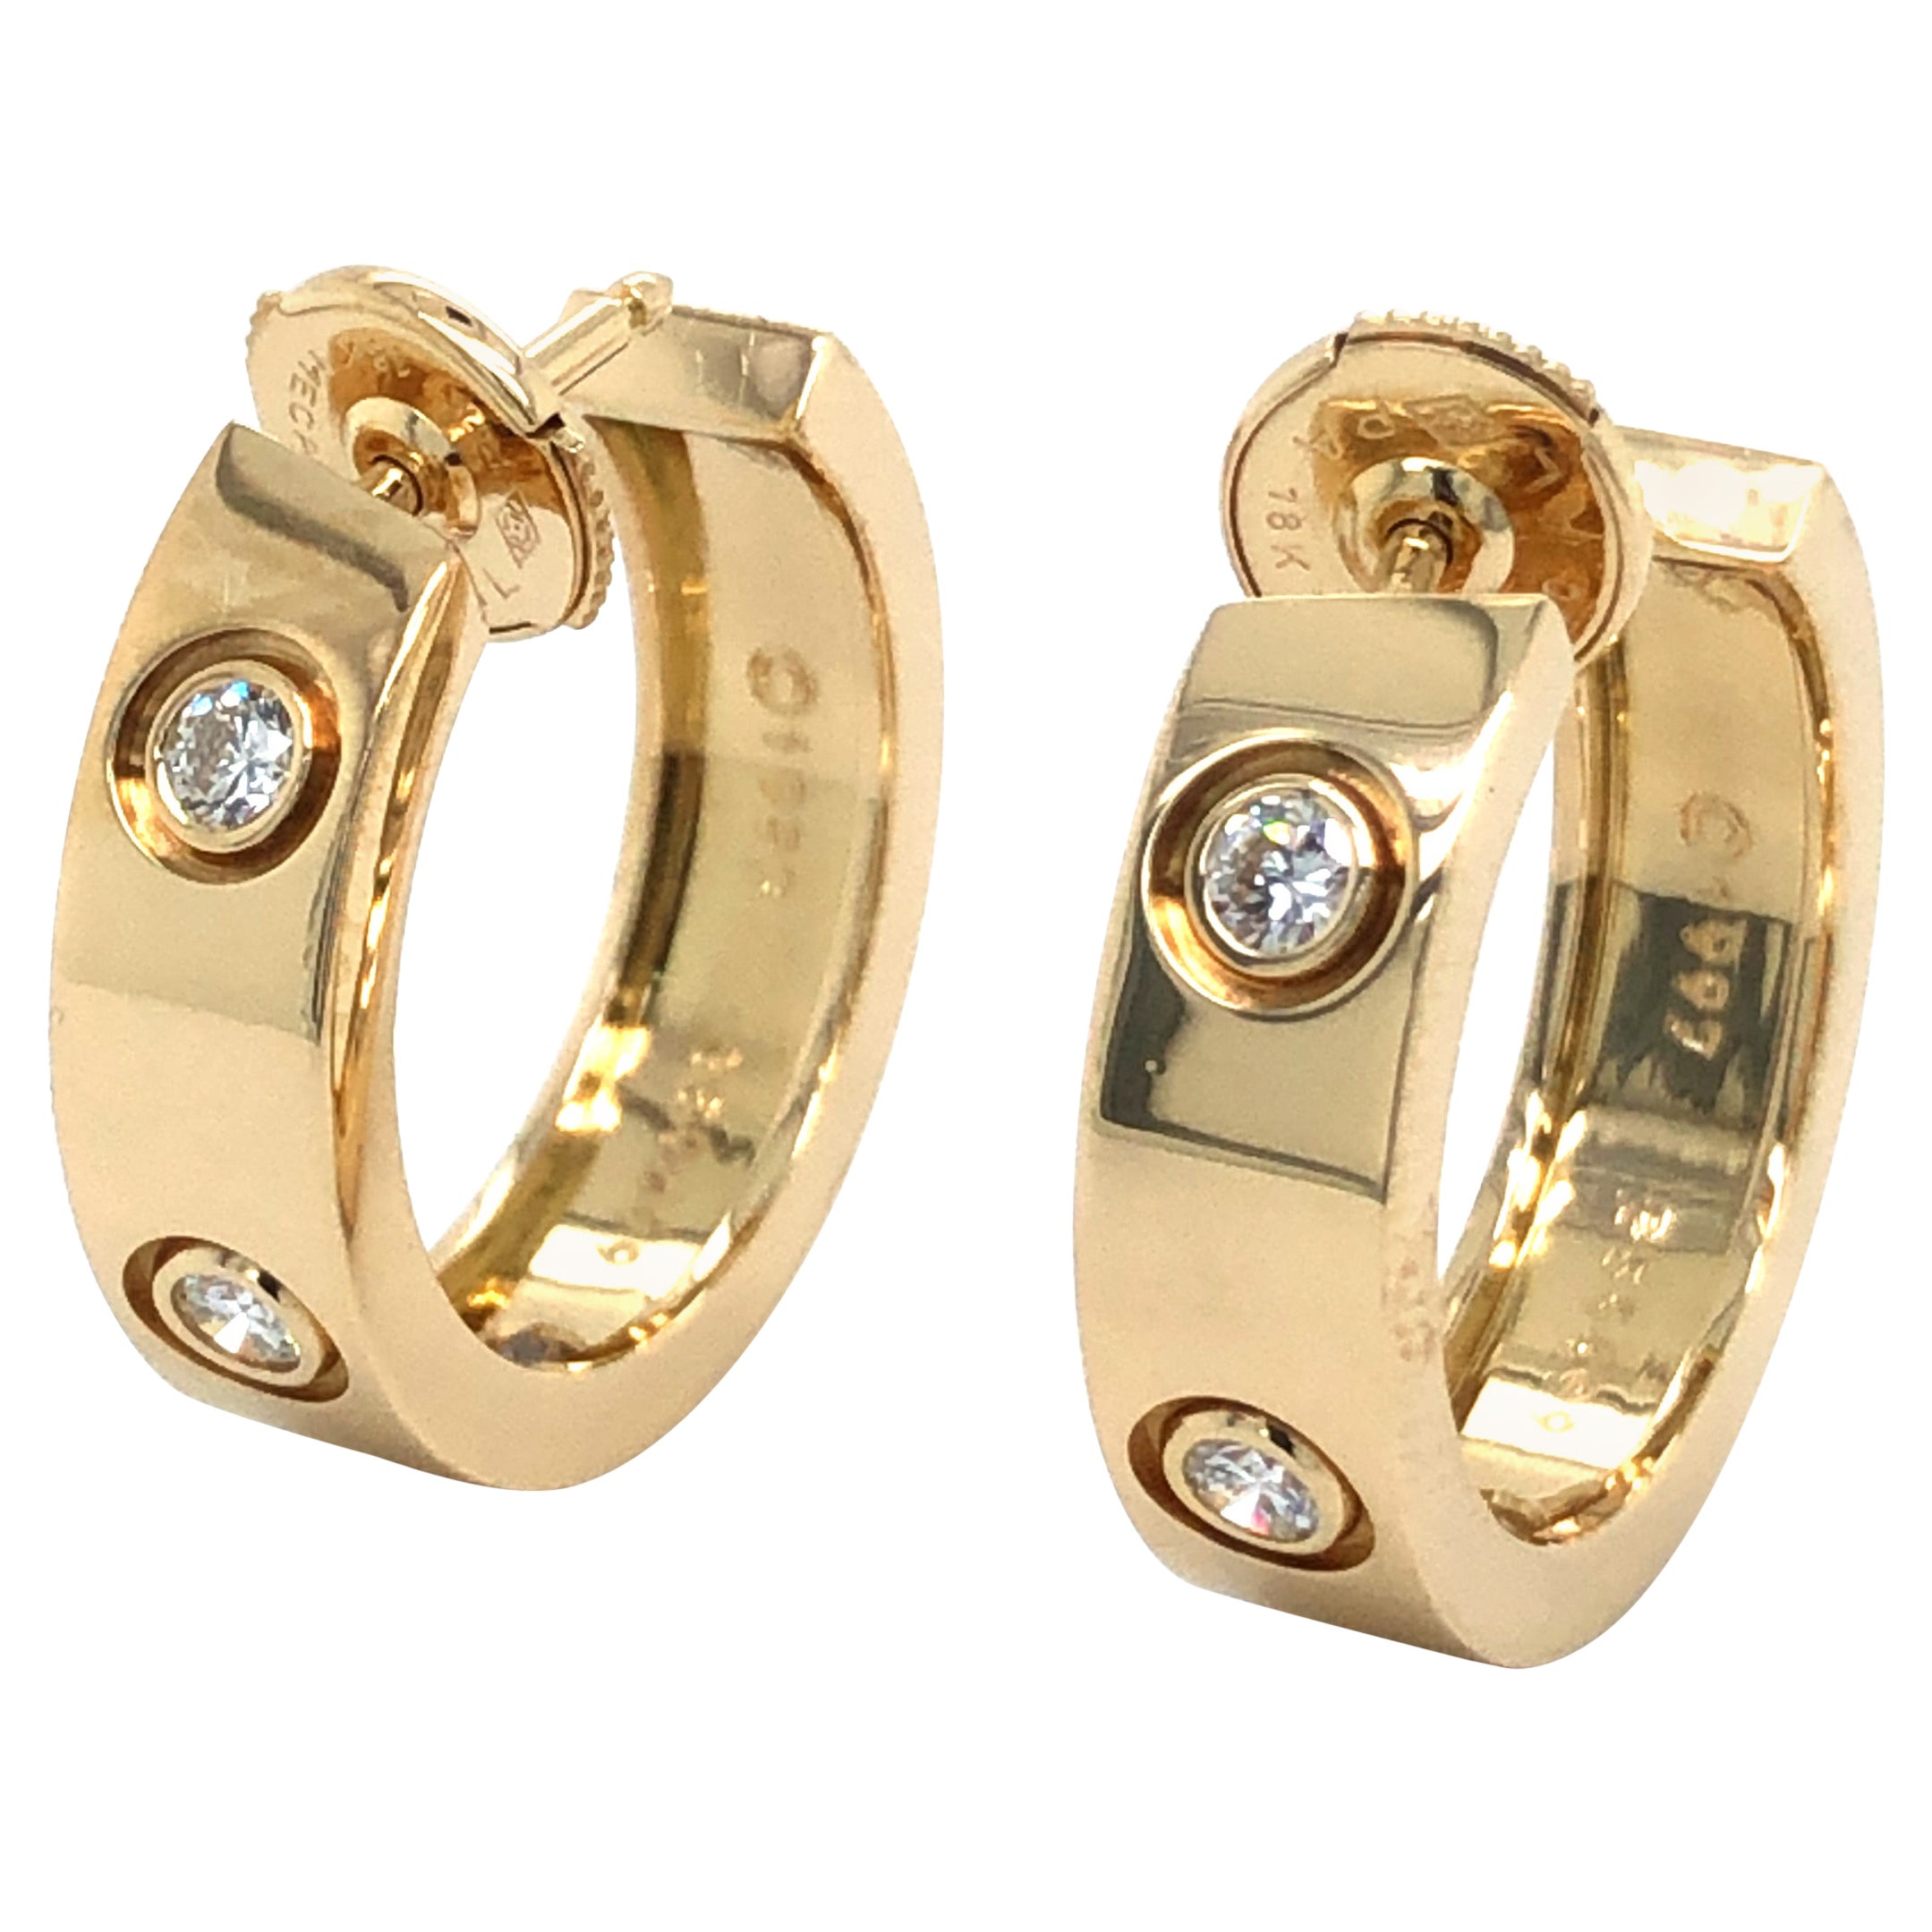 Amazon.com: VQYSKO Love Friendship Earrings Gifts for Women Teen Girls  Jewelry Gold and Silver Hoop Earrings Stainless Steel Dainty Stud with  Cubic Zirconia Stones Present for Her (Gold): Clothing, Shoes & Jewelry